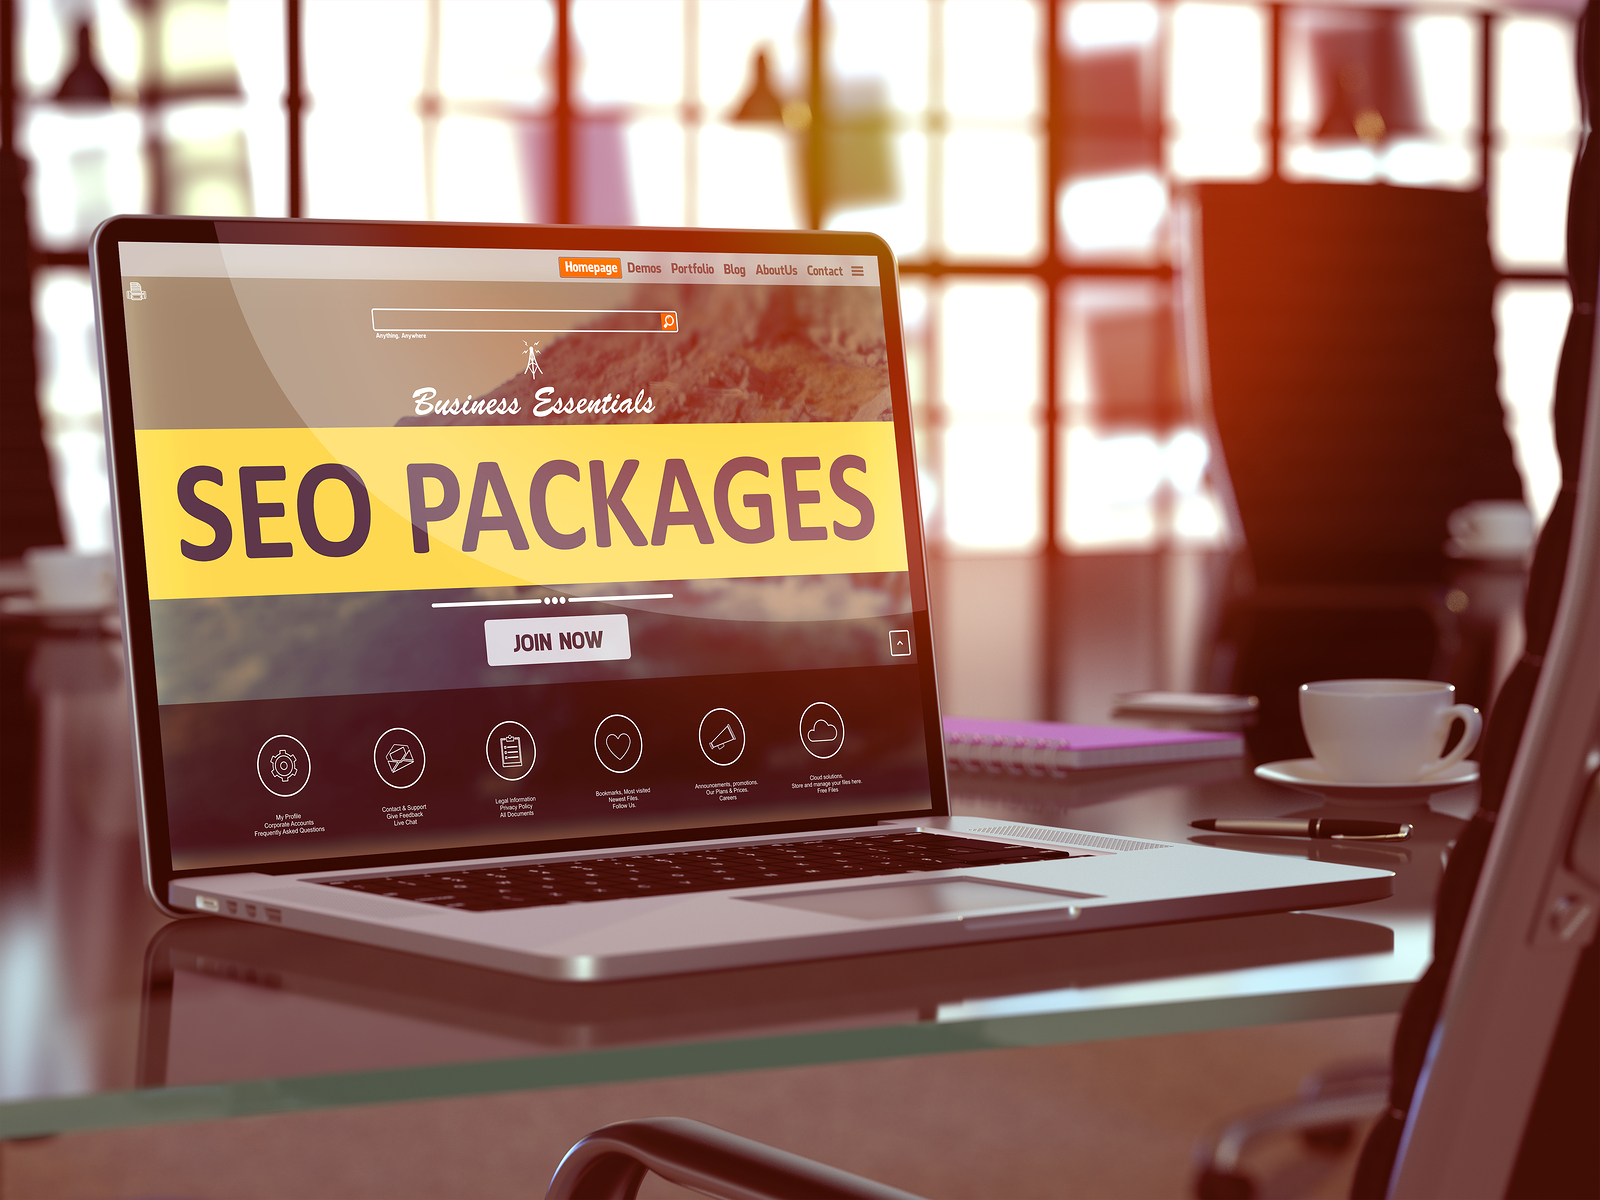 Don’t have money to put in marketing: Go for affordable SEO Packages